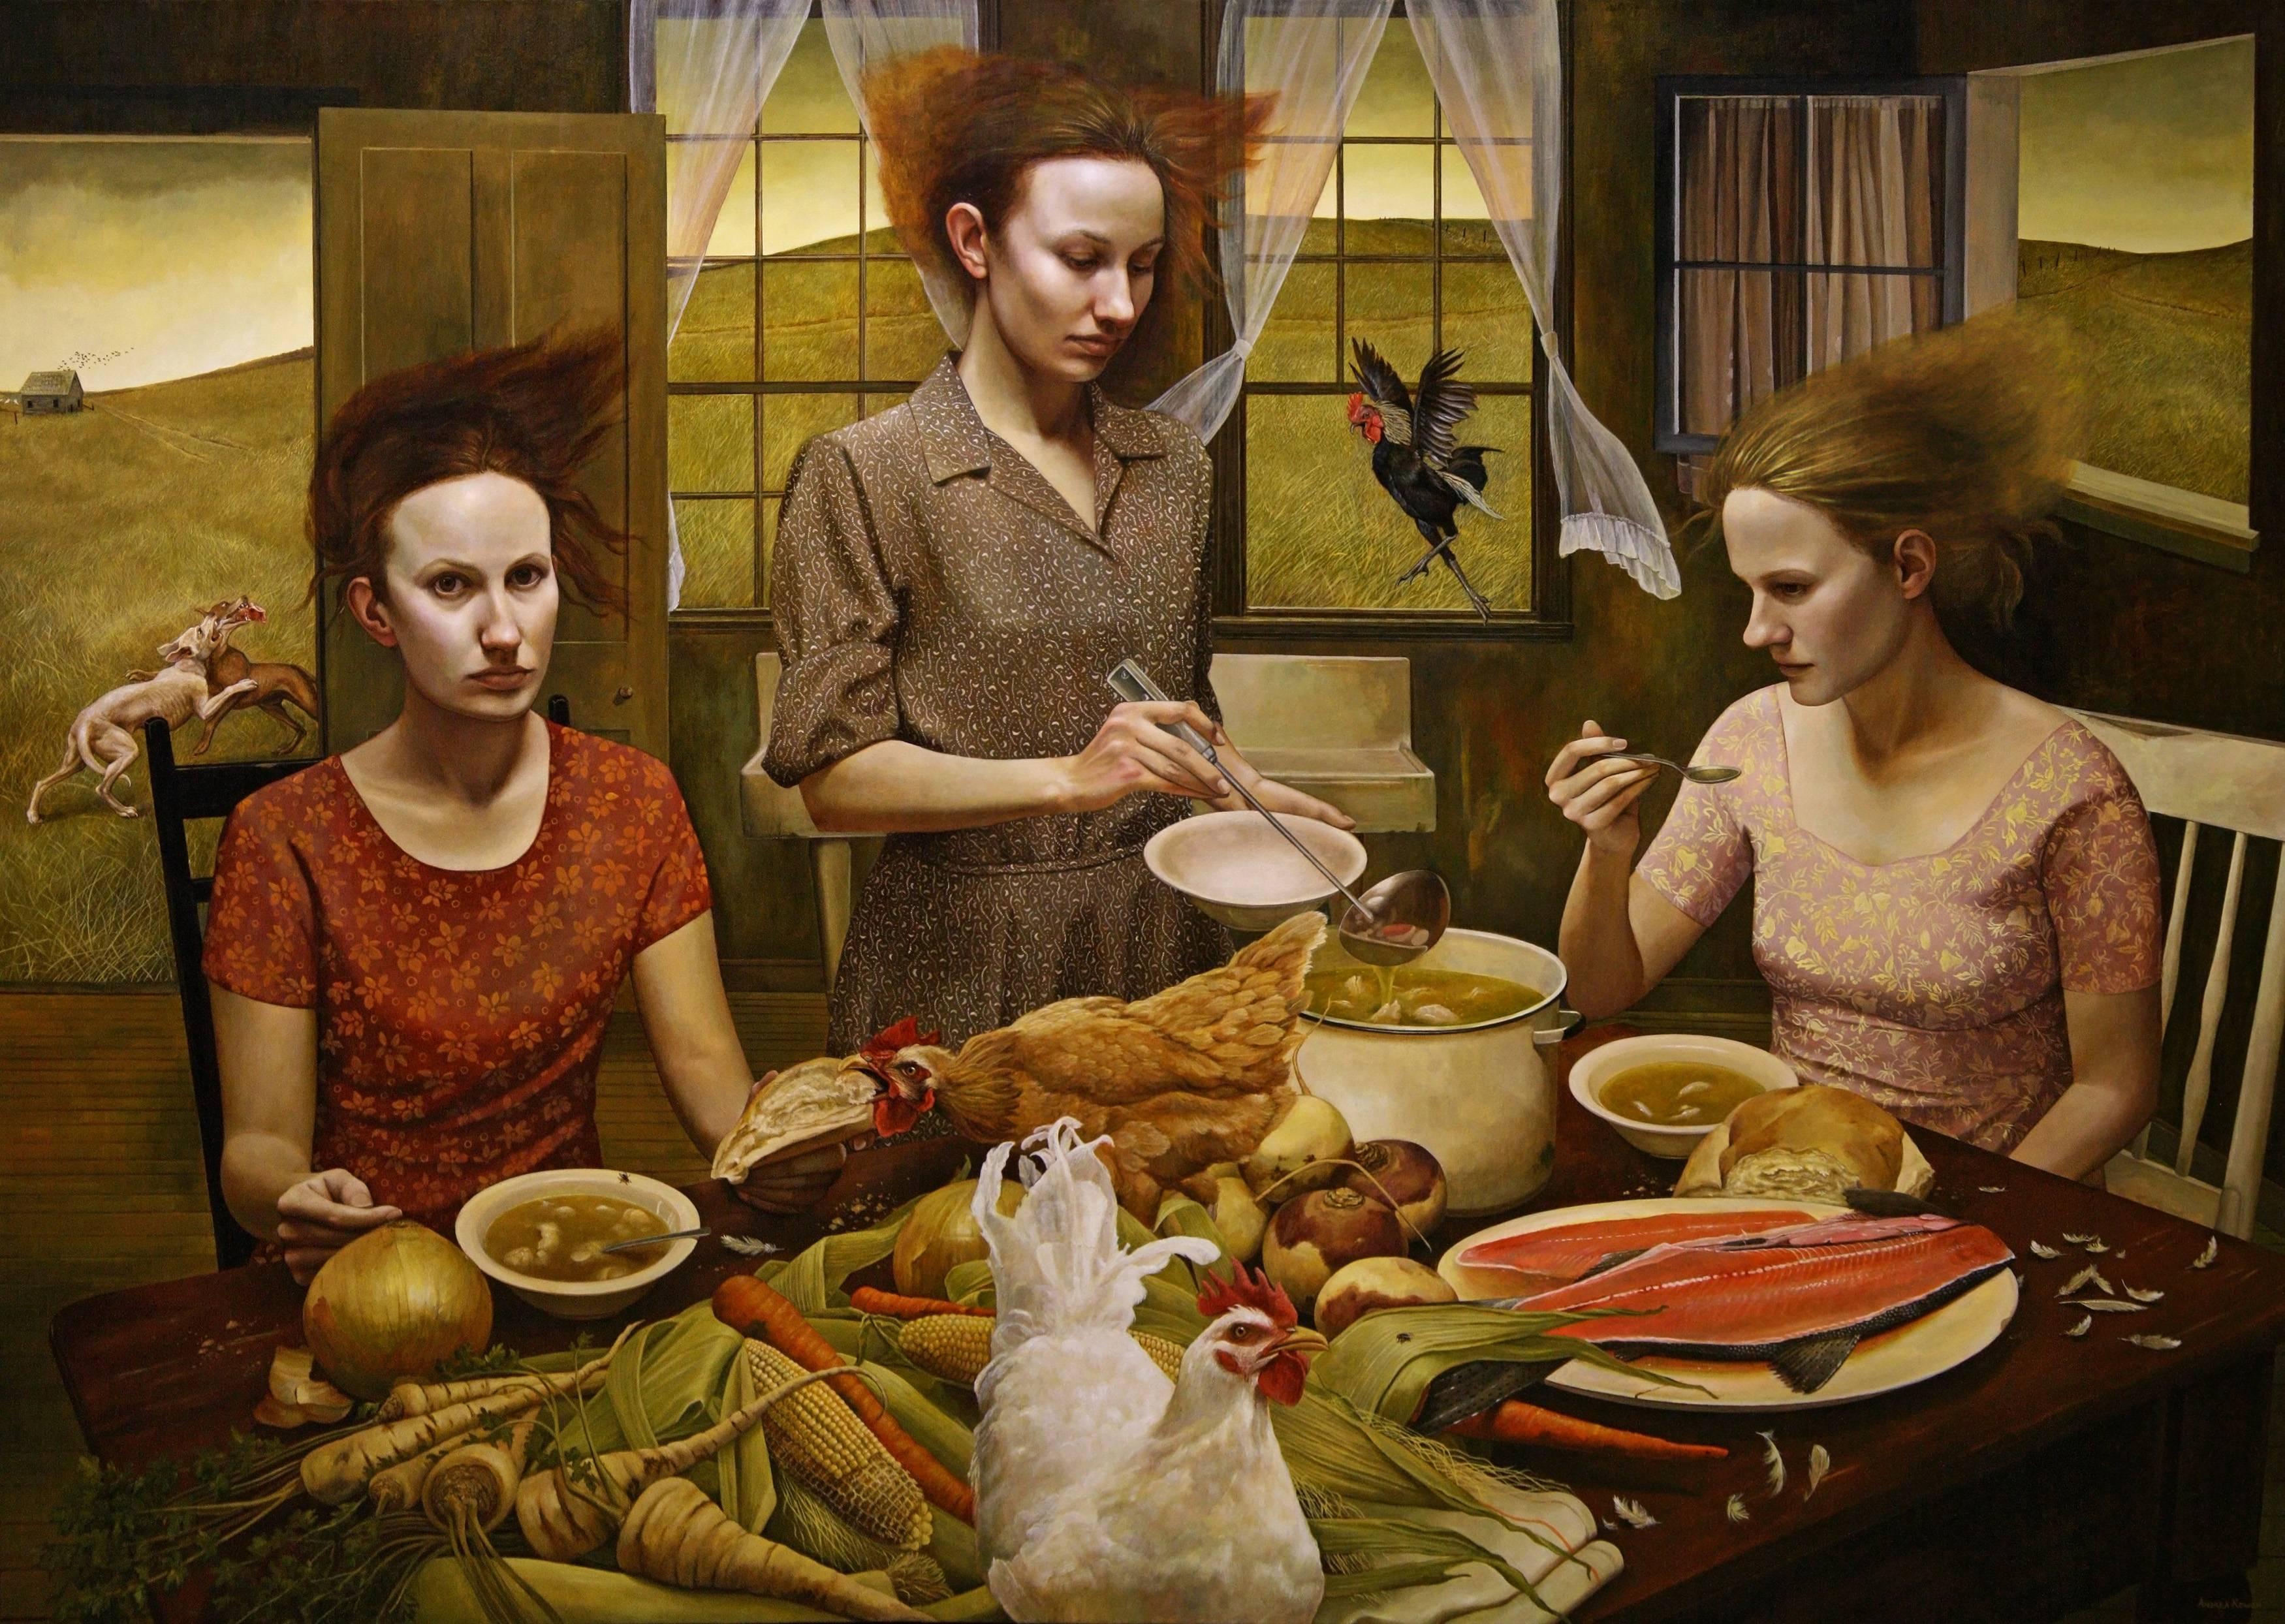 Andrea Kowch Figurative Print - The Feast - Limited Edition Hand Signed Print